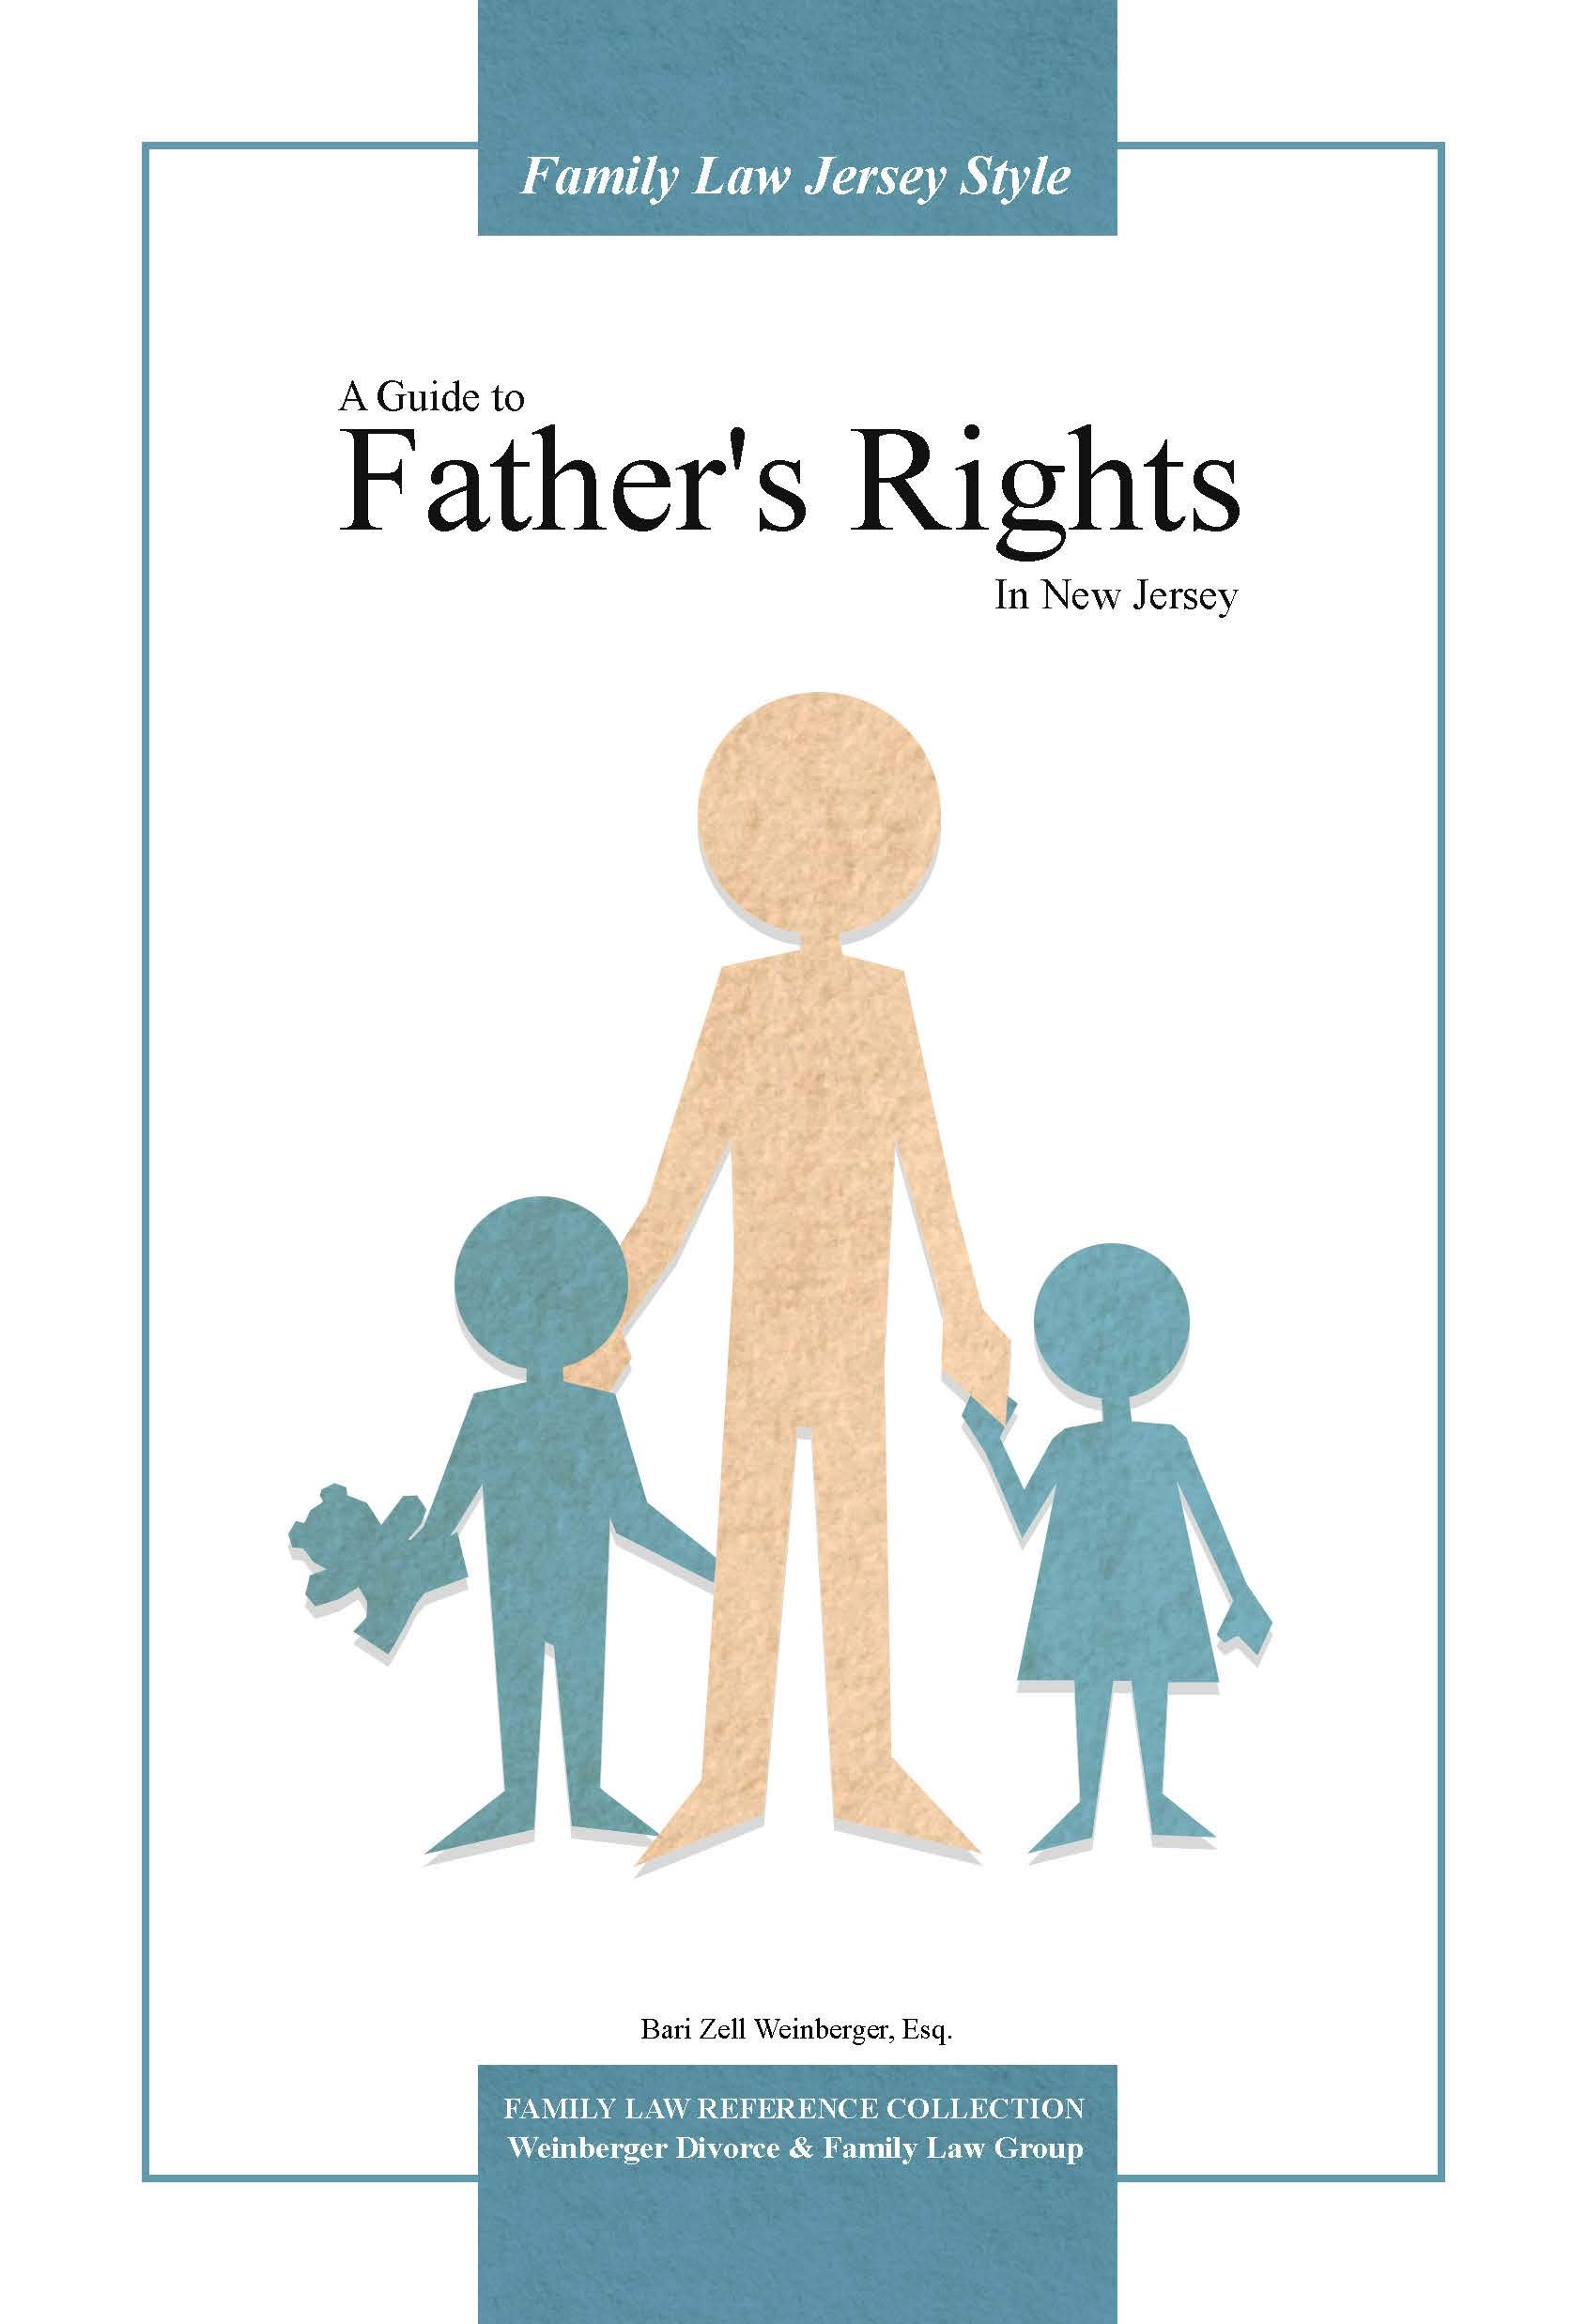 A Guide To Father's Rights In New Jersey